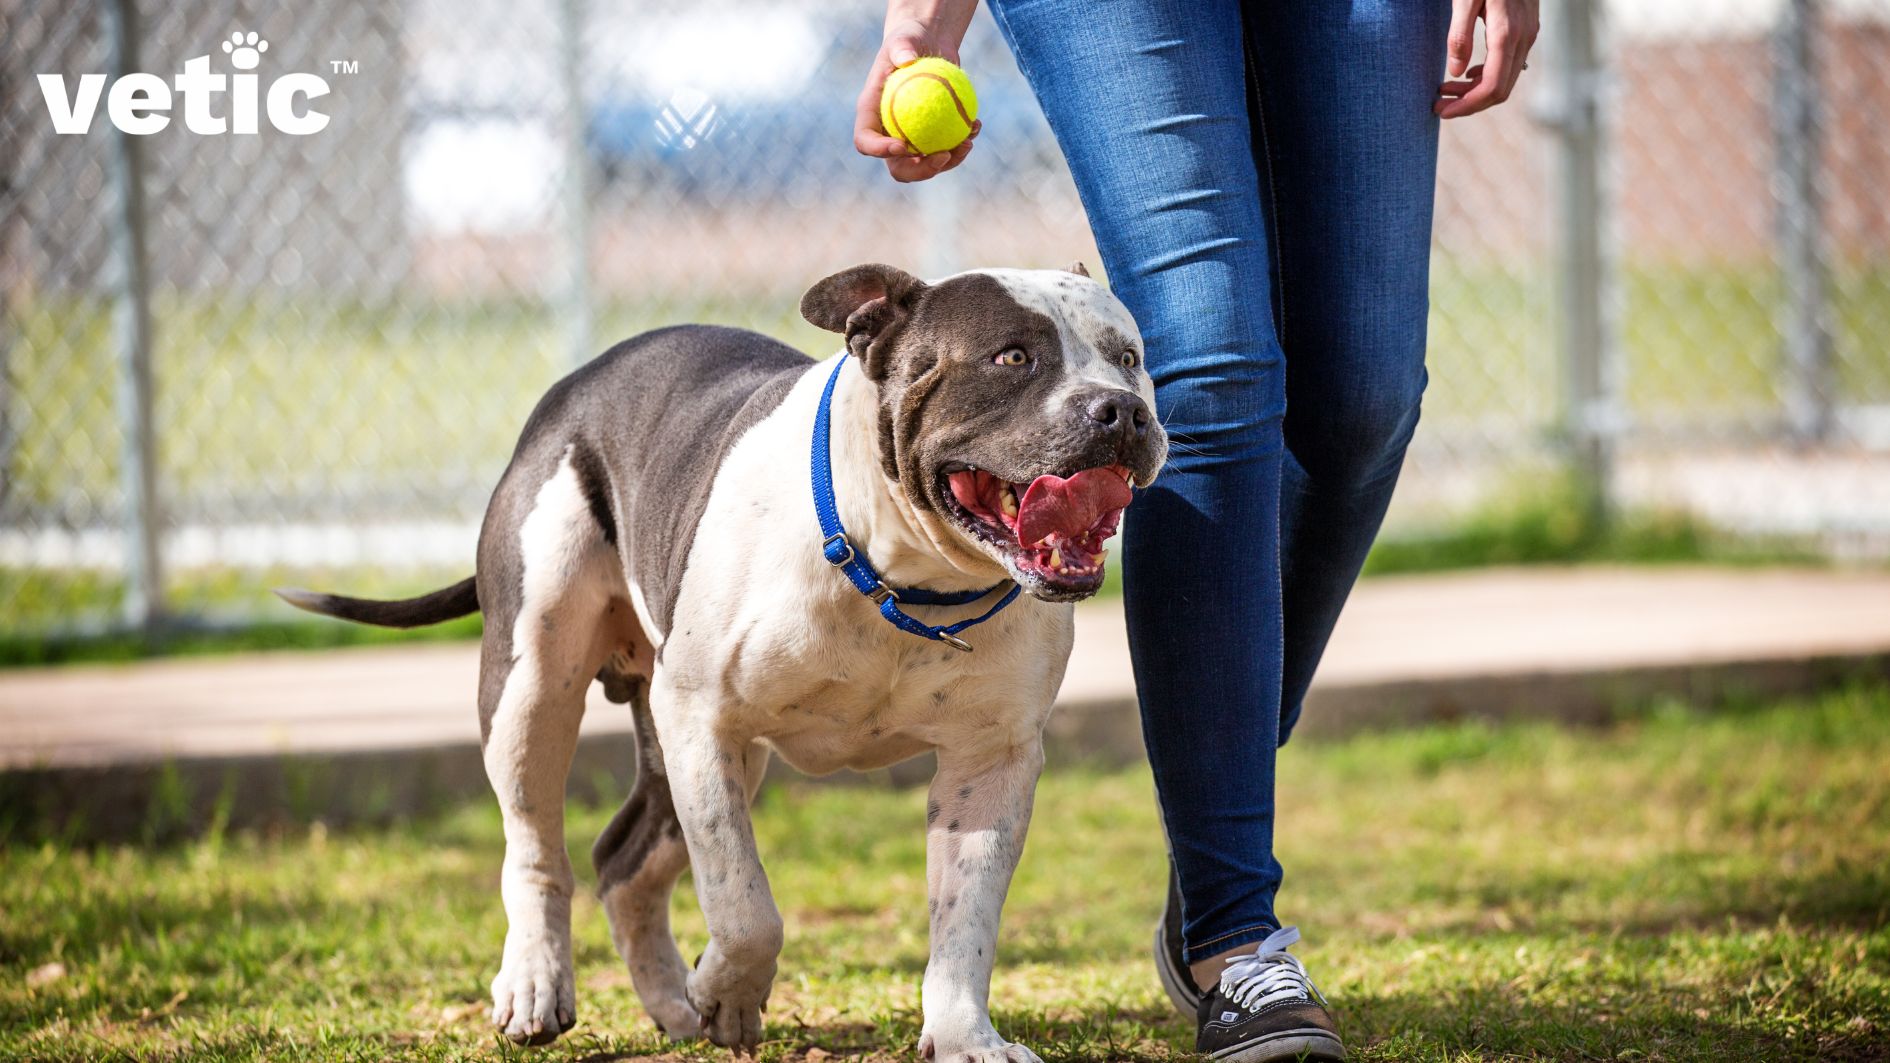 A Staffordshire Terrier, which is also clubbed under the moniker Pitbull in the US playing at the dog park. the dog parent has a tennis ball in their hand. the dog is off leash and has a blue collar on.